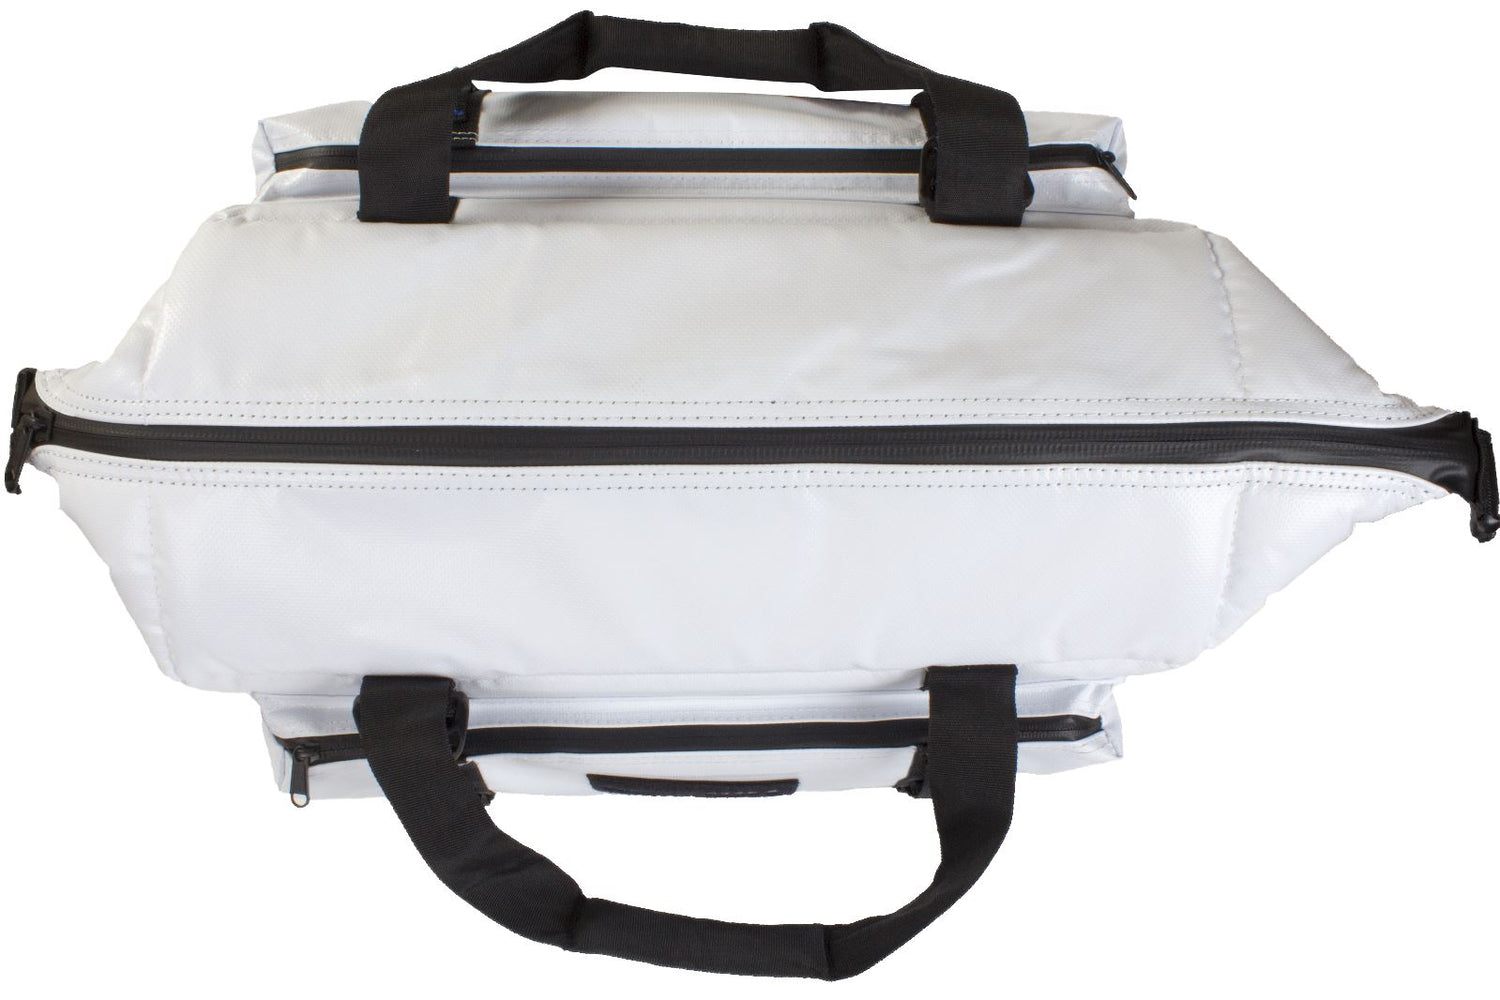 BoatBag™ xTreme Cooler Bag - NorChill® Coolers & Drinkware